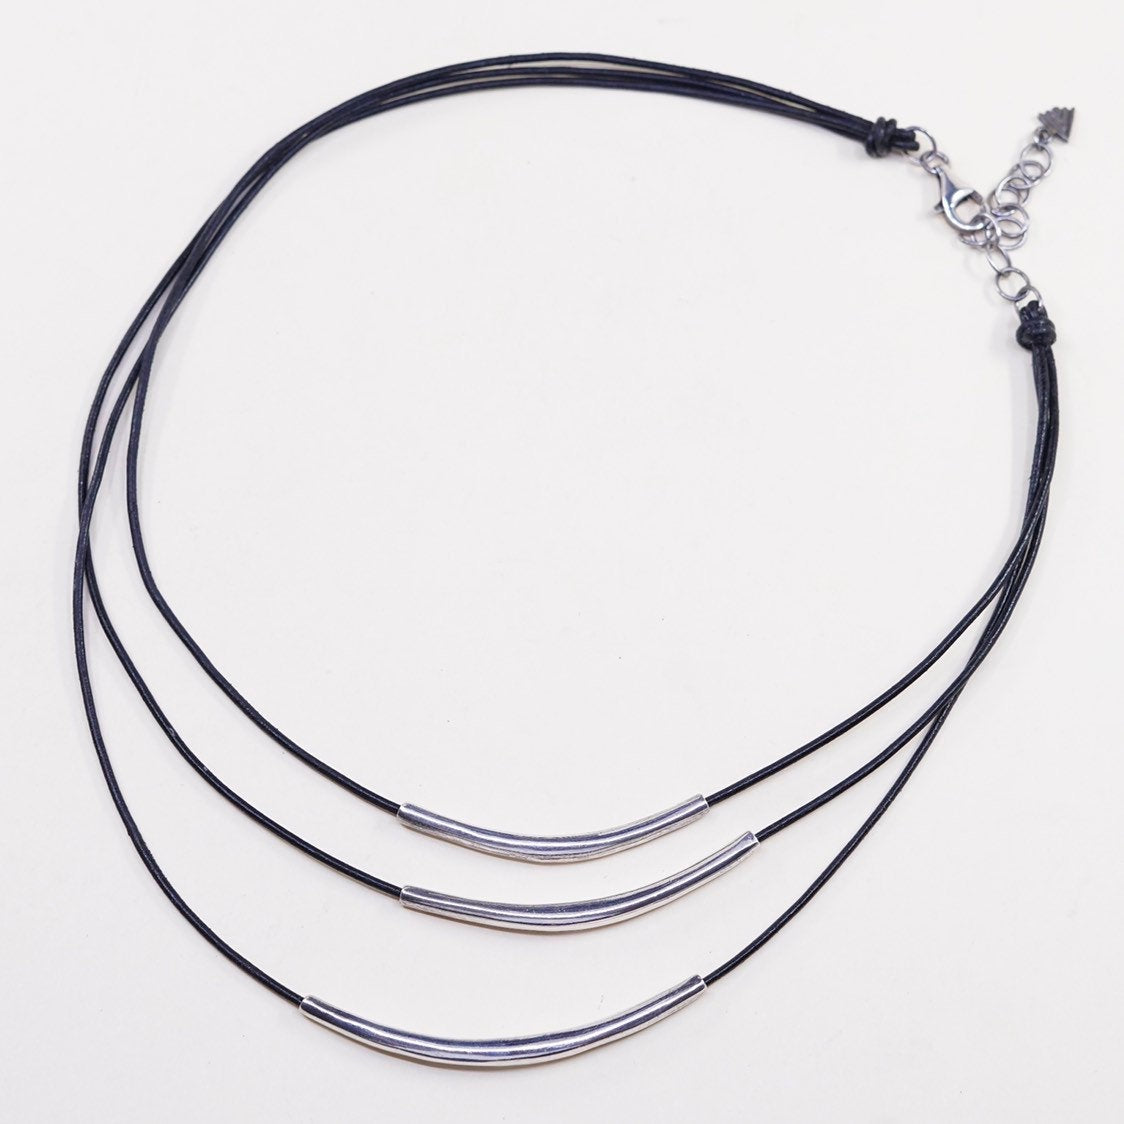 16”, Silpada Necklace N1571 925 Cascading Black Leather Cords & Sterling Bars